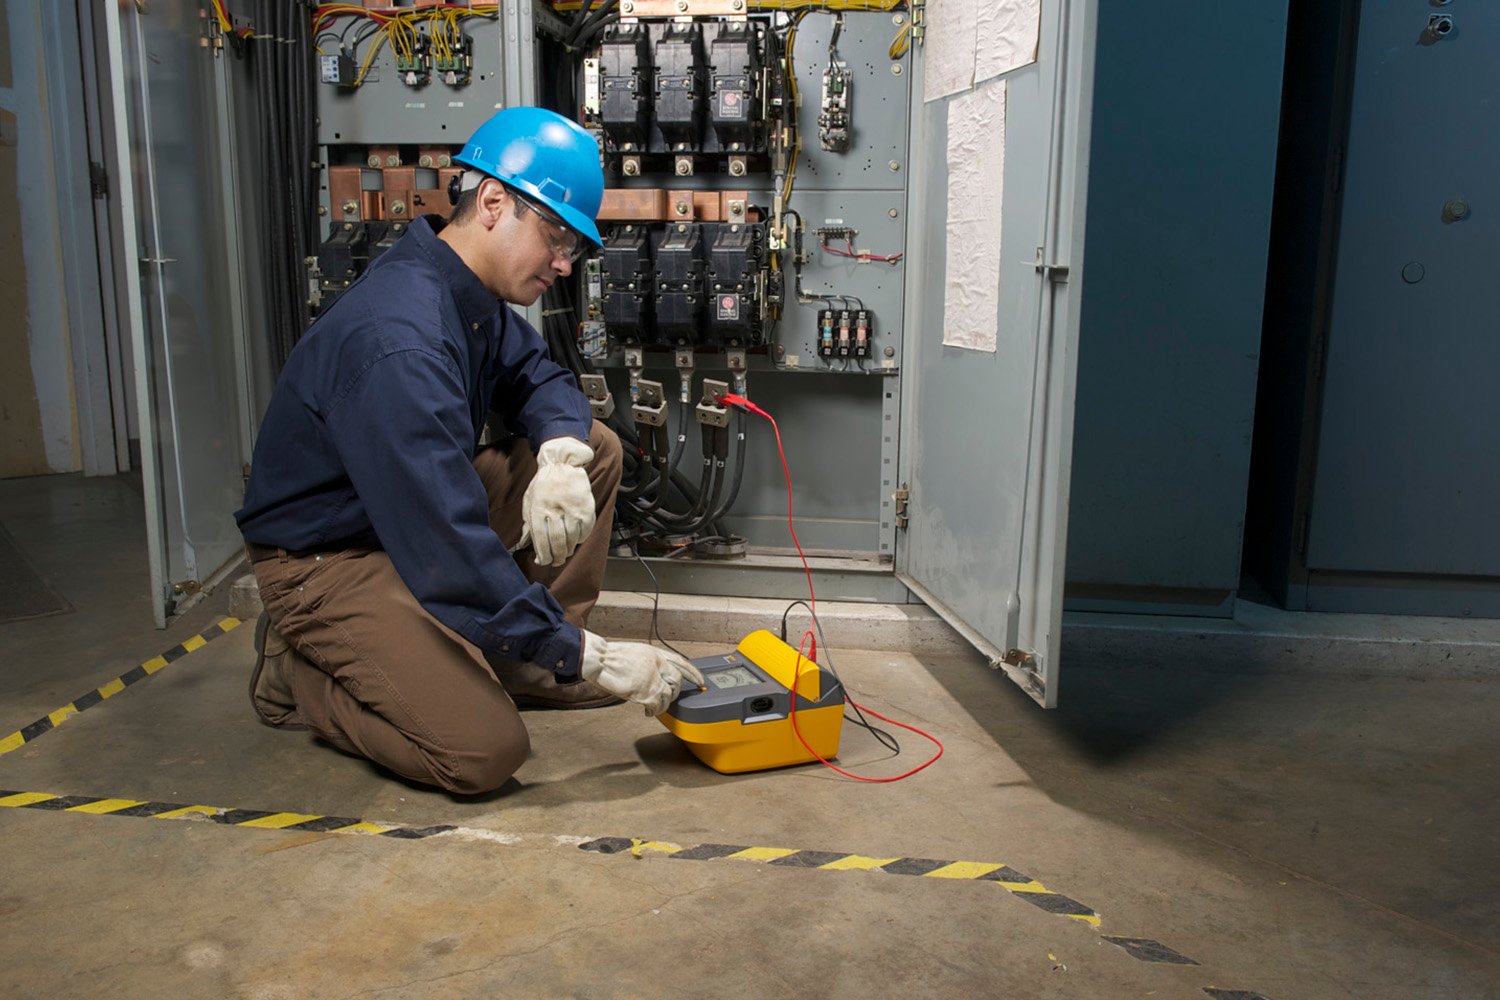 An electrician kneels before an open electrical panel, making measurements with an insulation tester